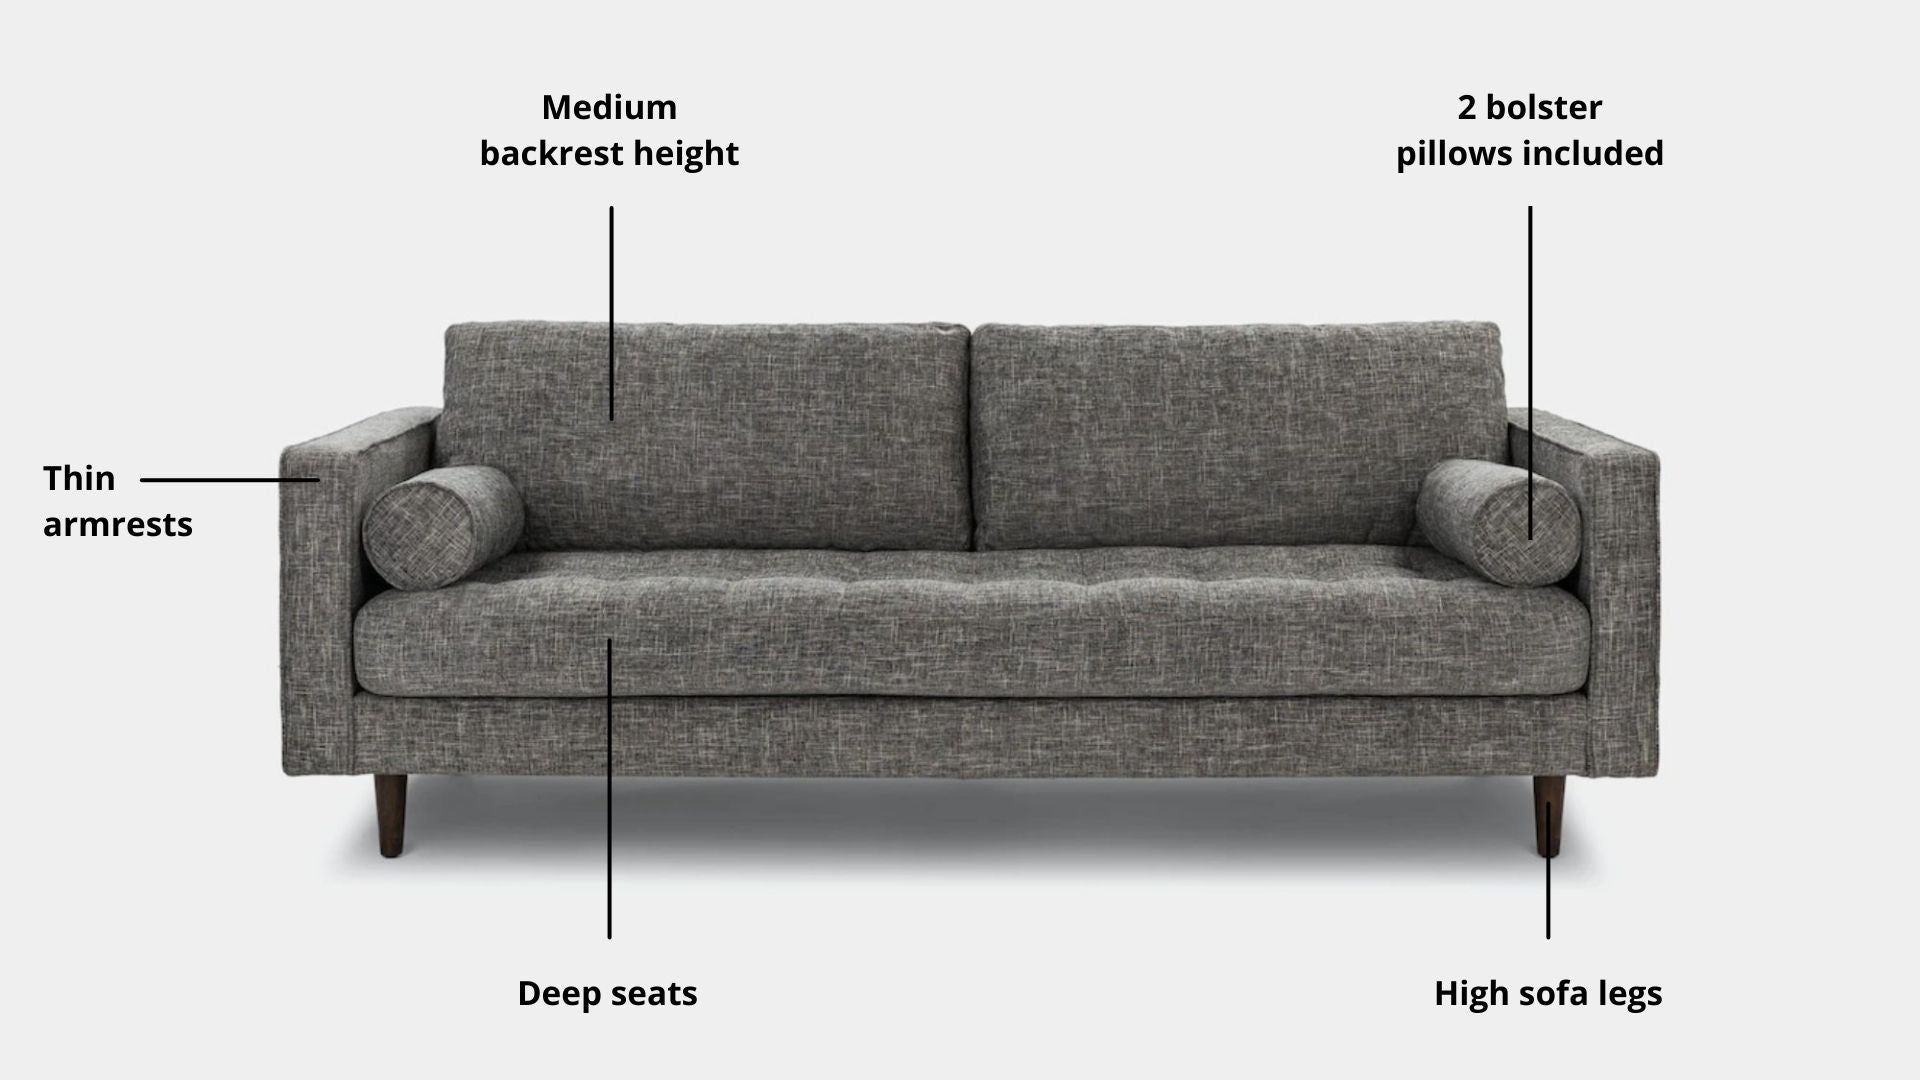 Key features such as armrest thickness, cushion height, seat depth and sofa leg height for Castle Fabric Sofa